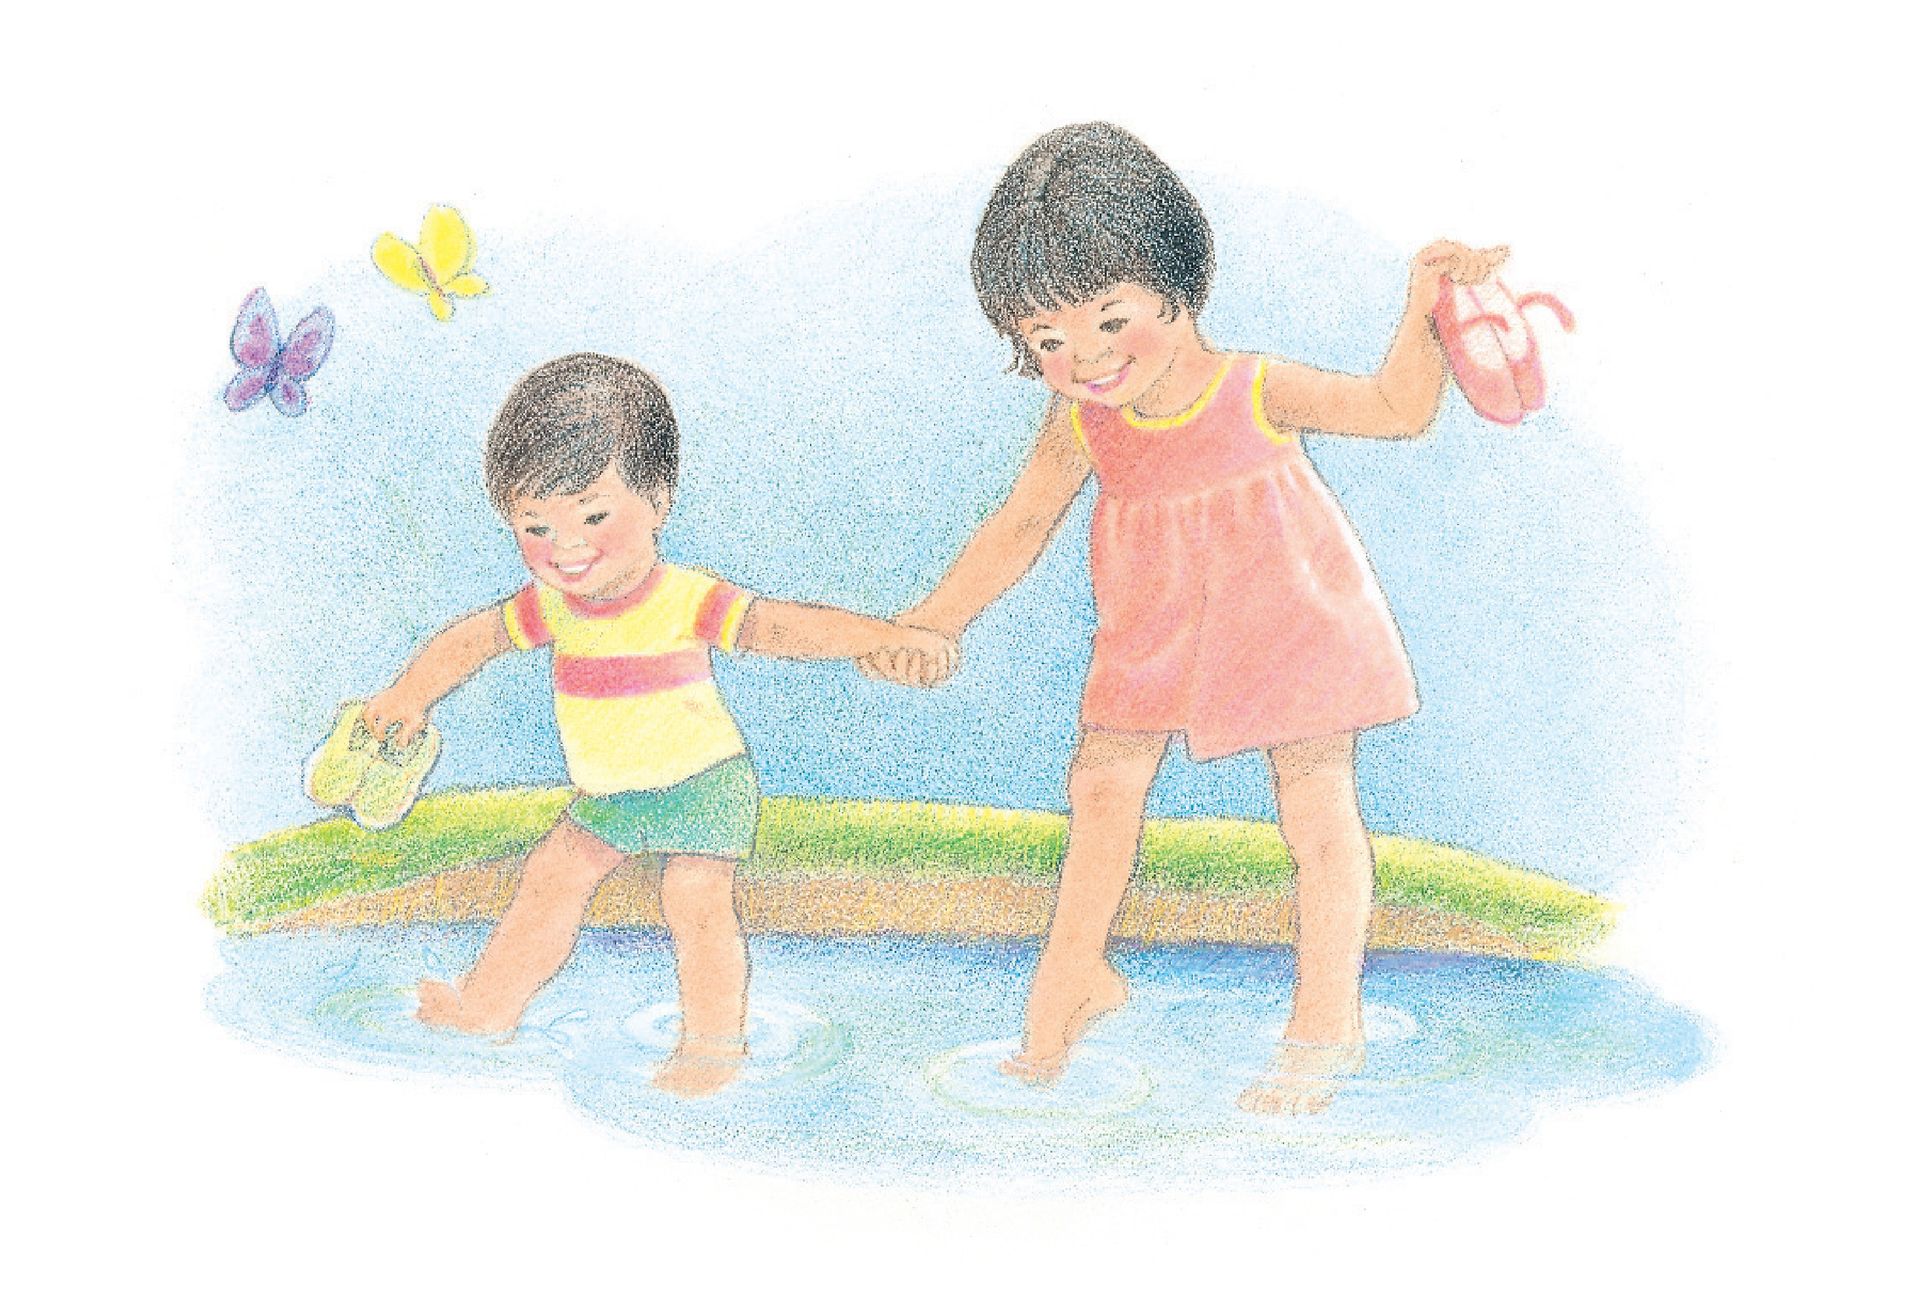 Two children hold hands and wade into shallow water. From the Children’s Songbook, page 239, “Because It’s Spring”; watercolor illustration by Virginia Sargent.